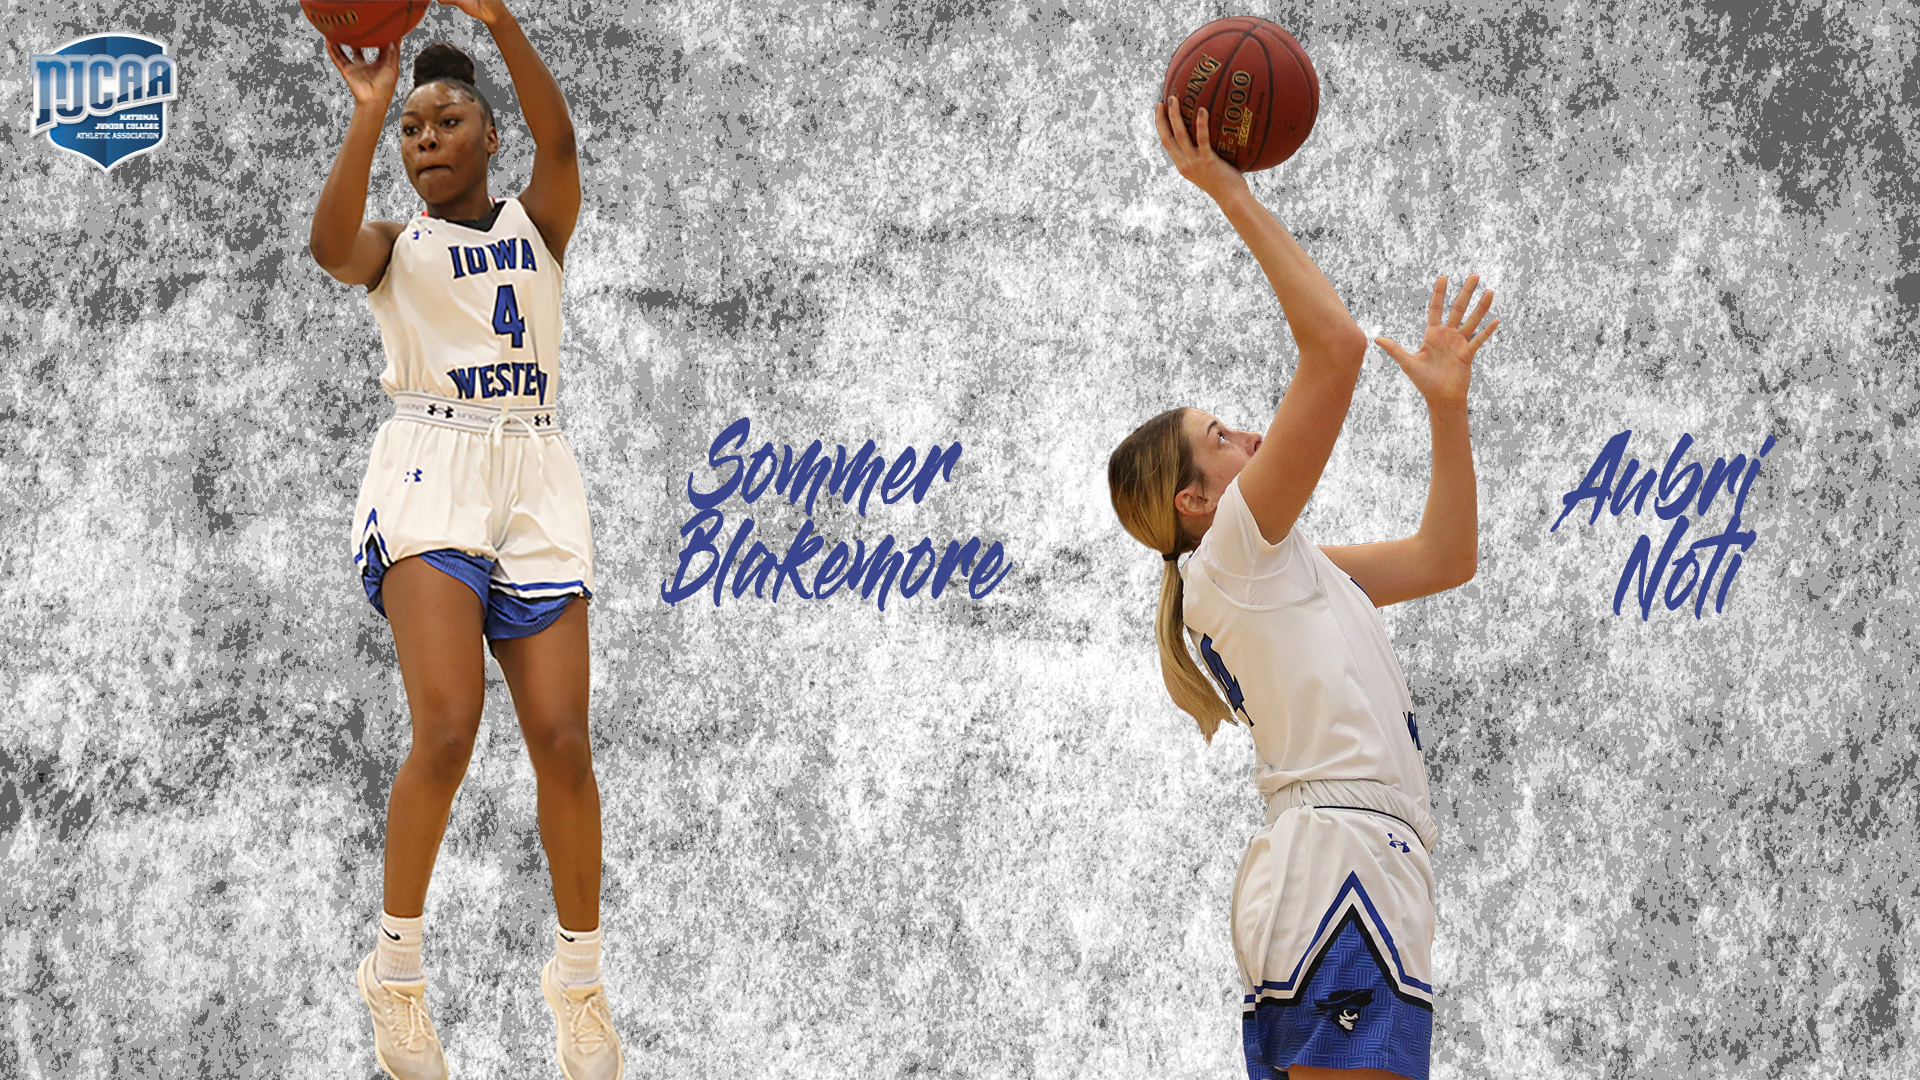 Blakemore and Noti selected for NJCAA All-Star Weekend